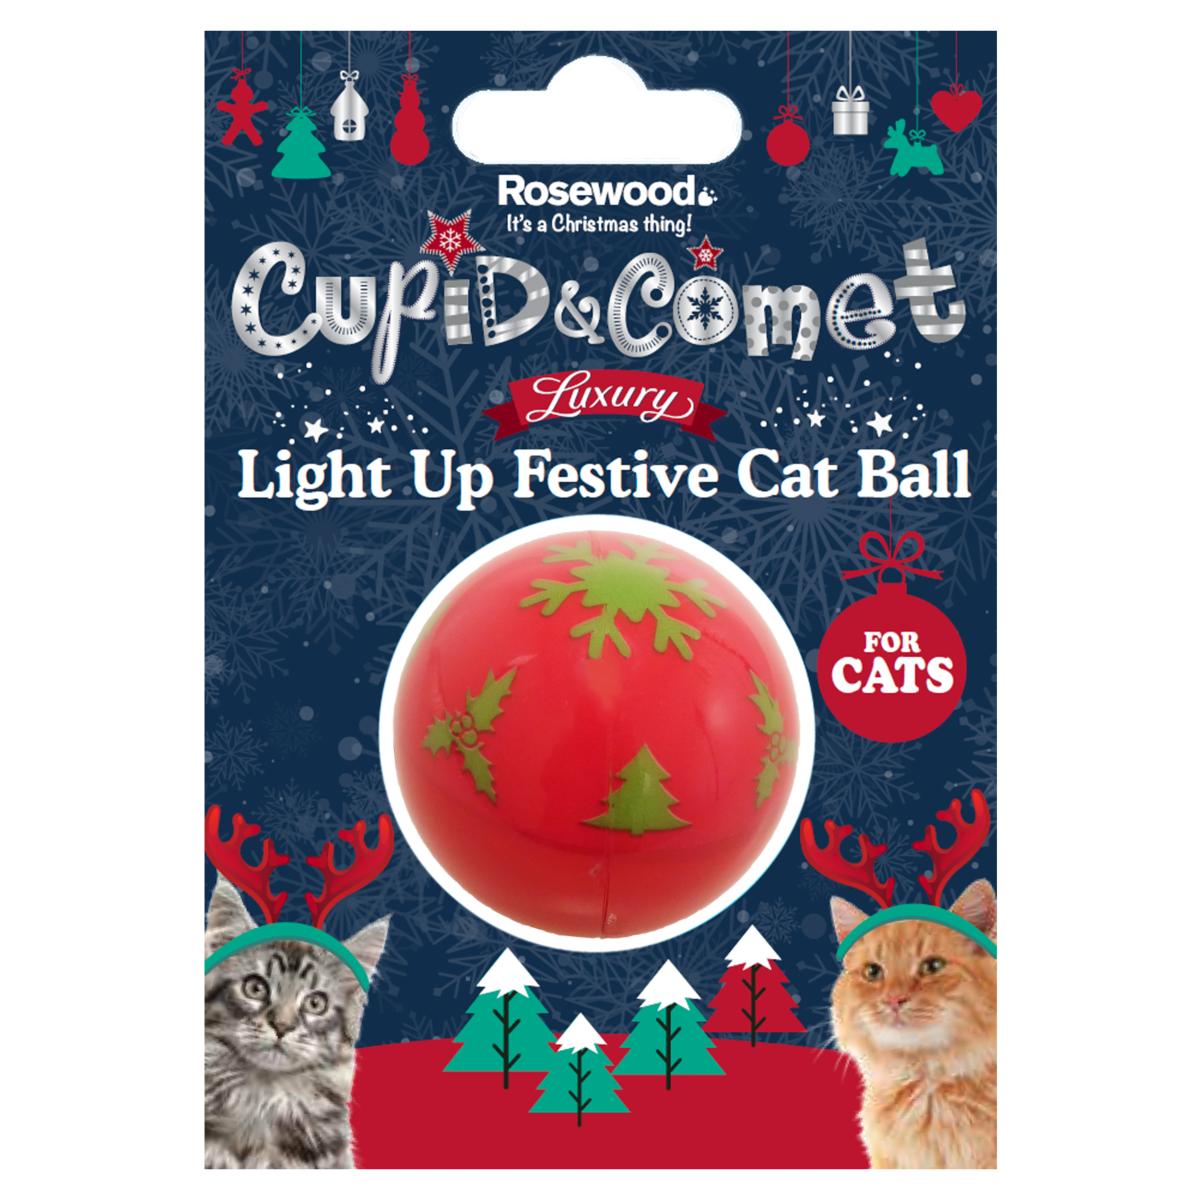 Cupid & Comet | Light Up Festive Ball | Christmas Cat Toy